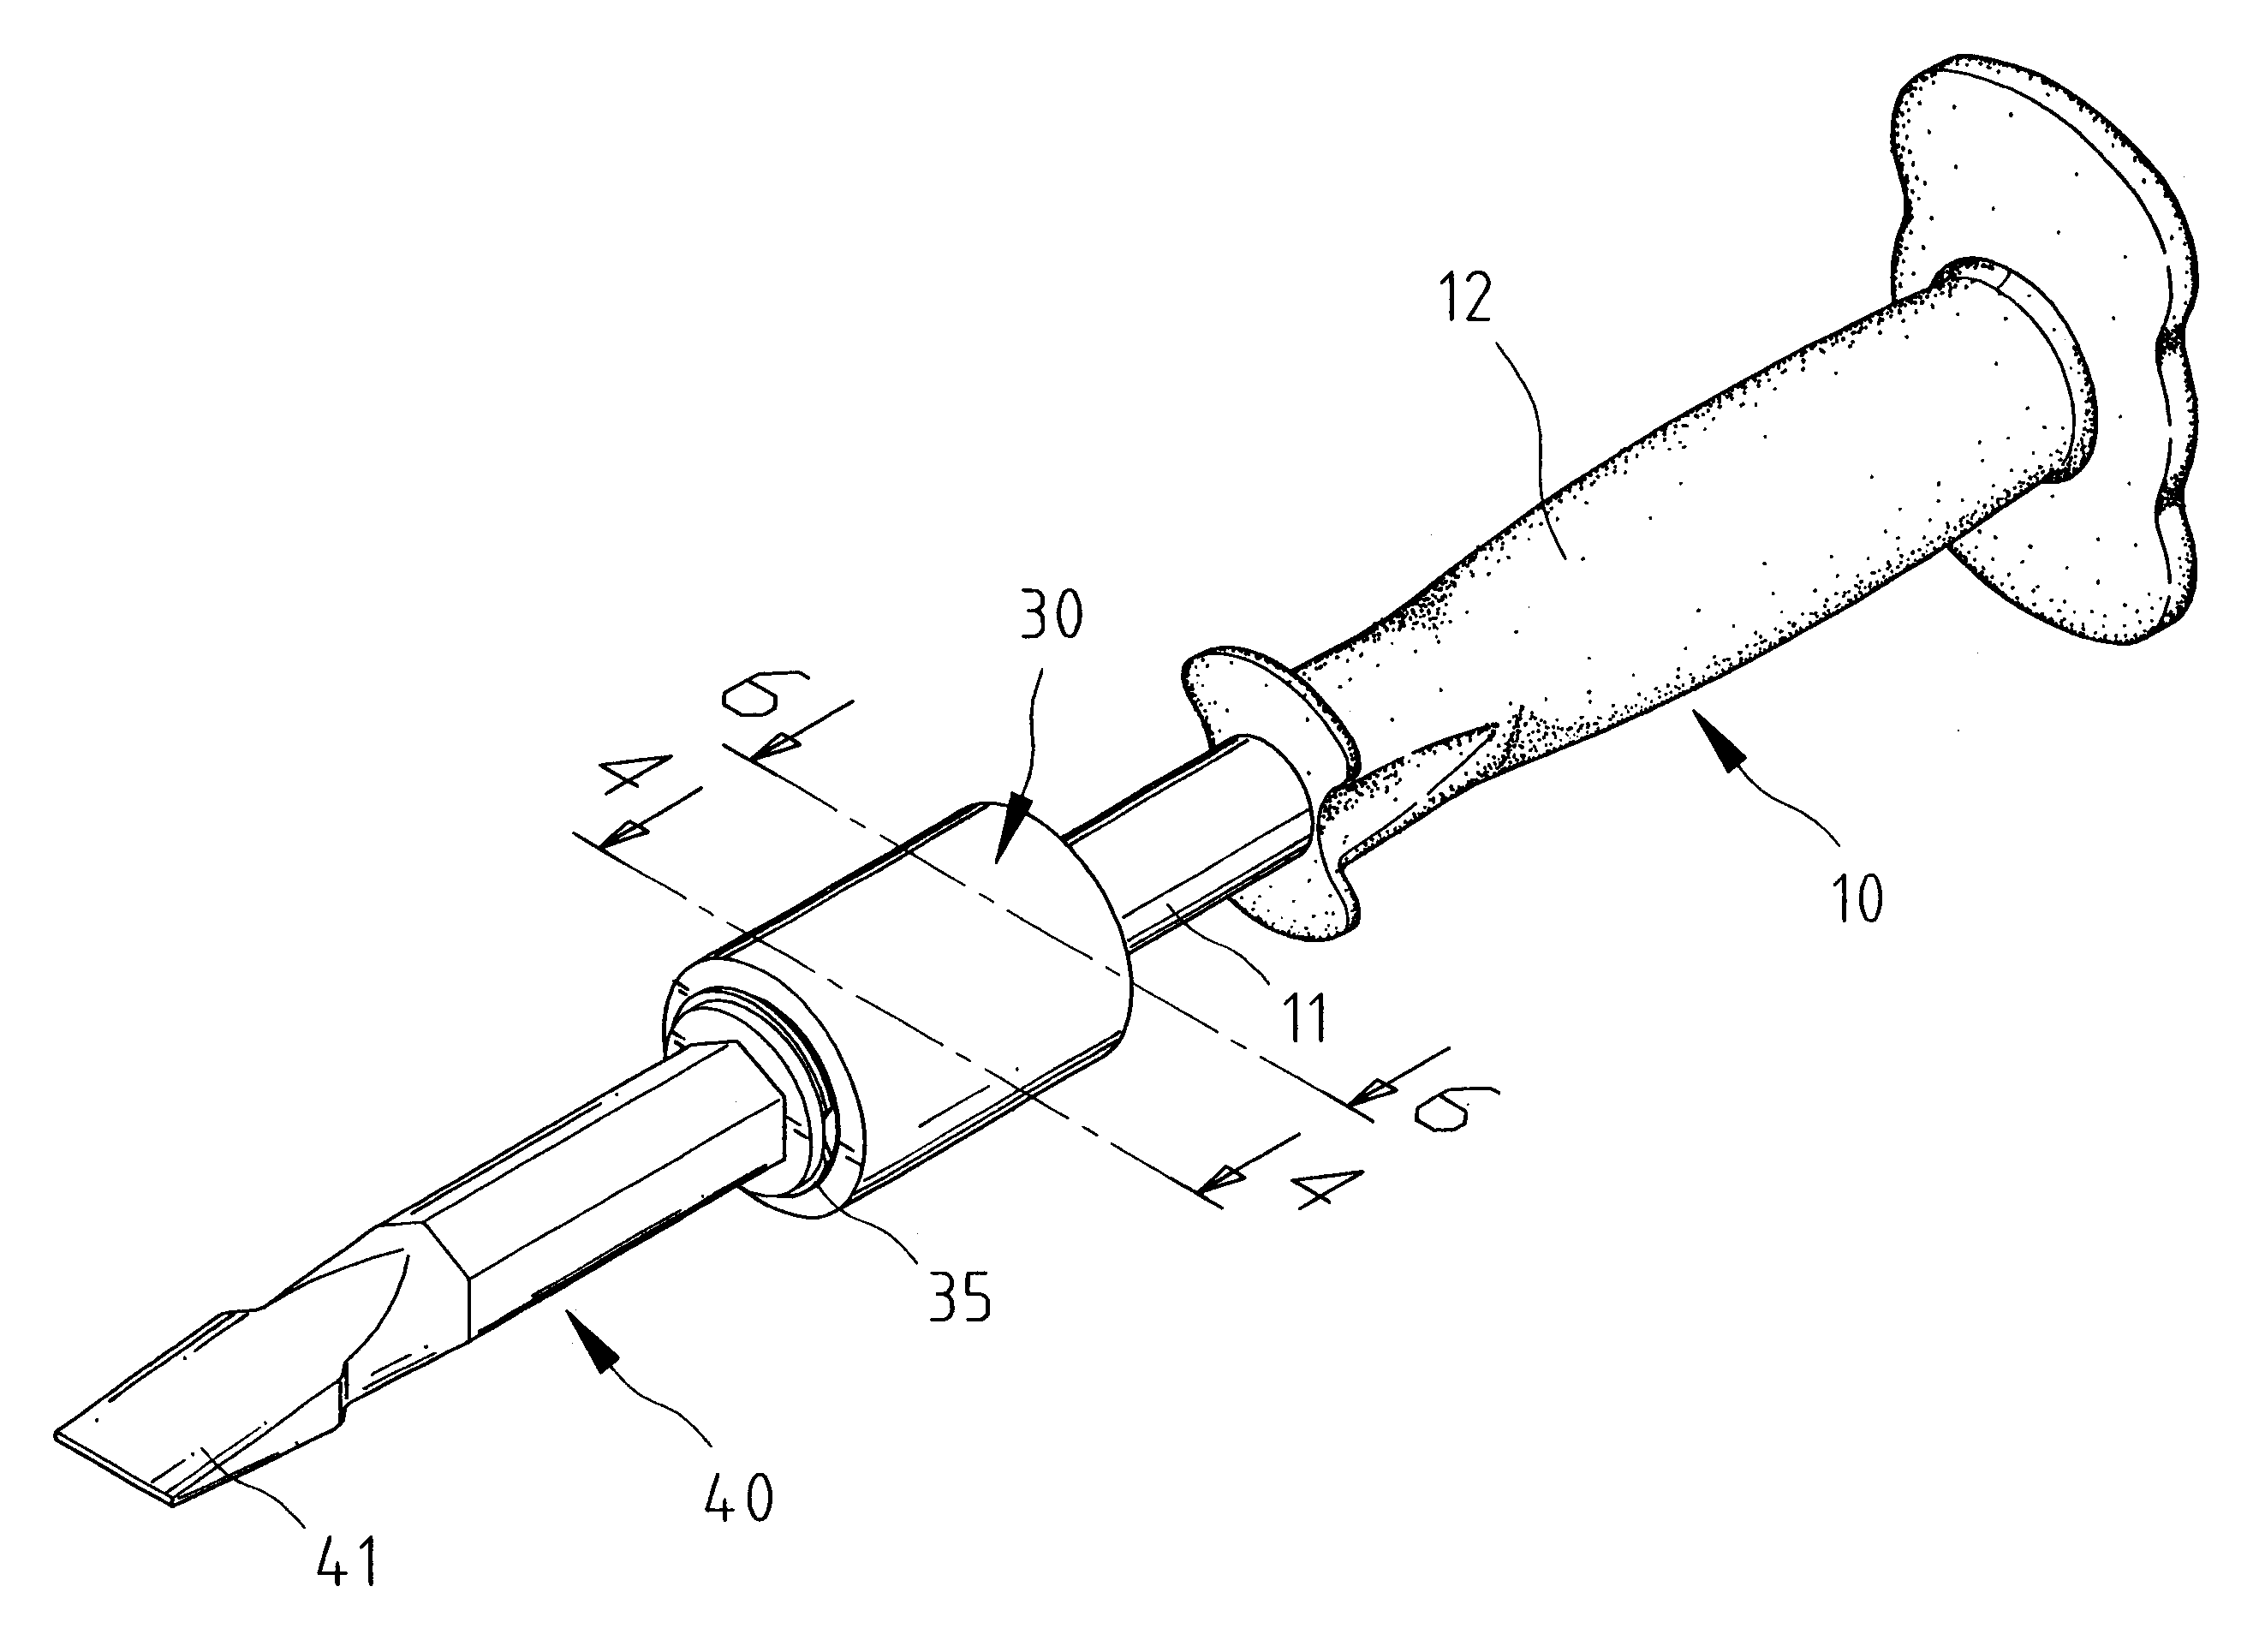 Tool including a tool bit and a handle